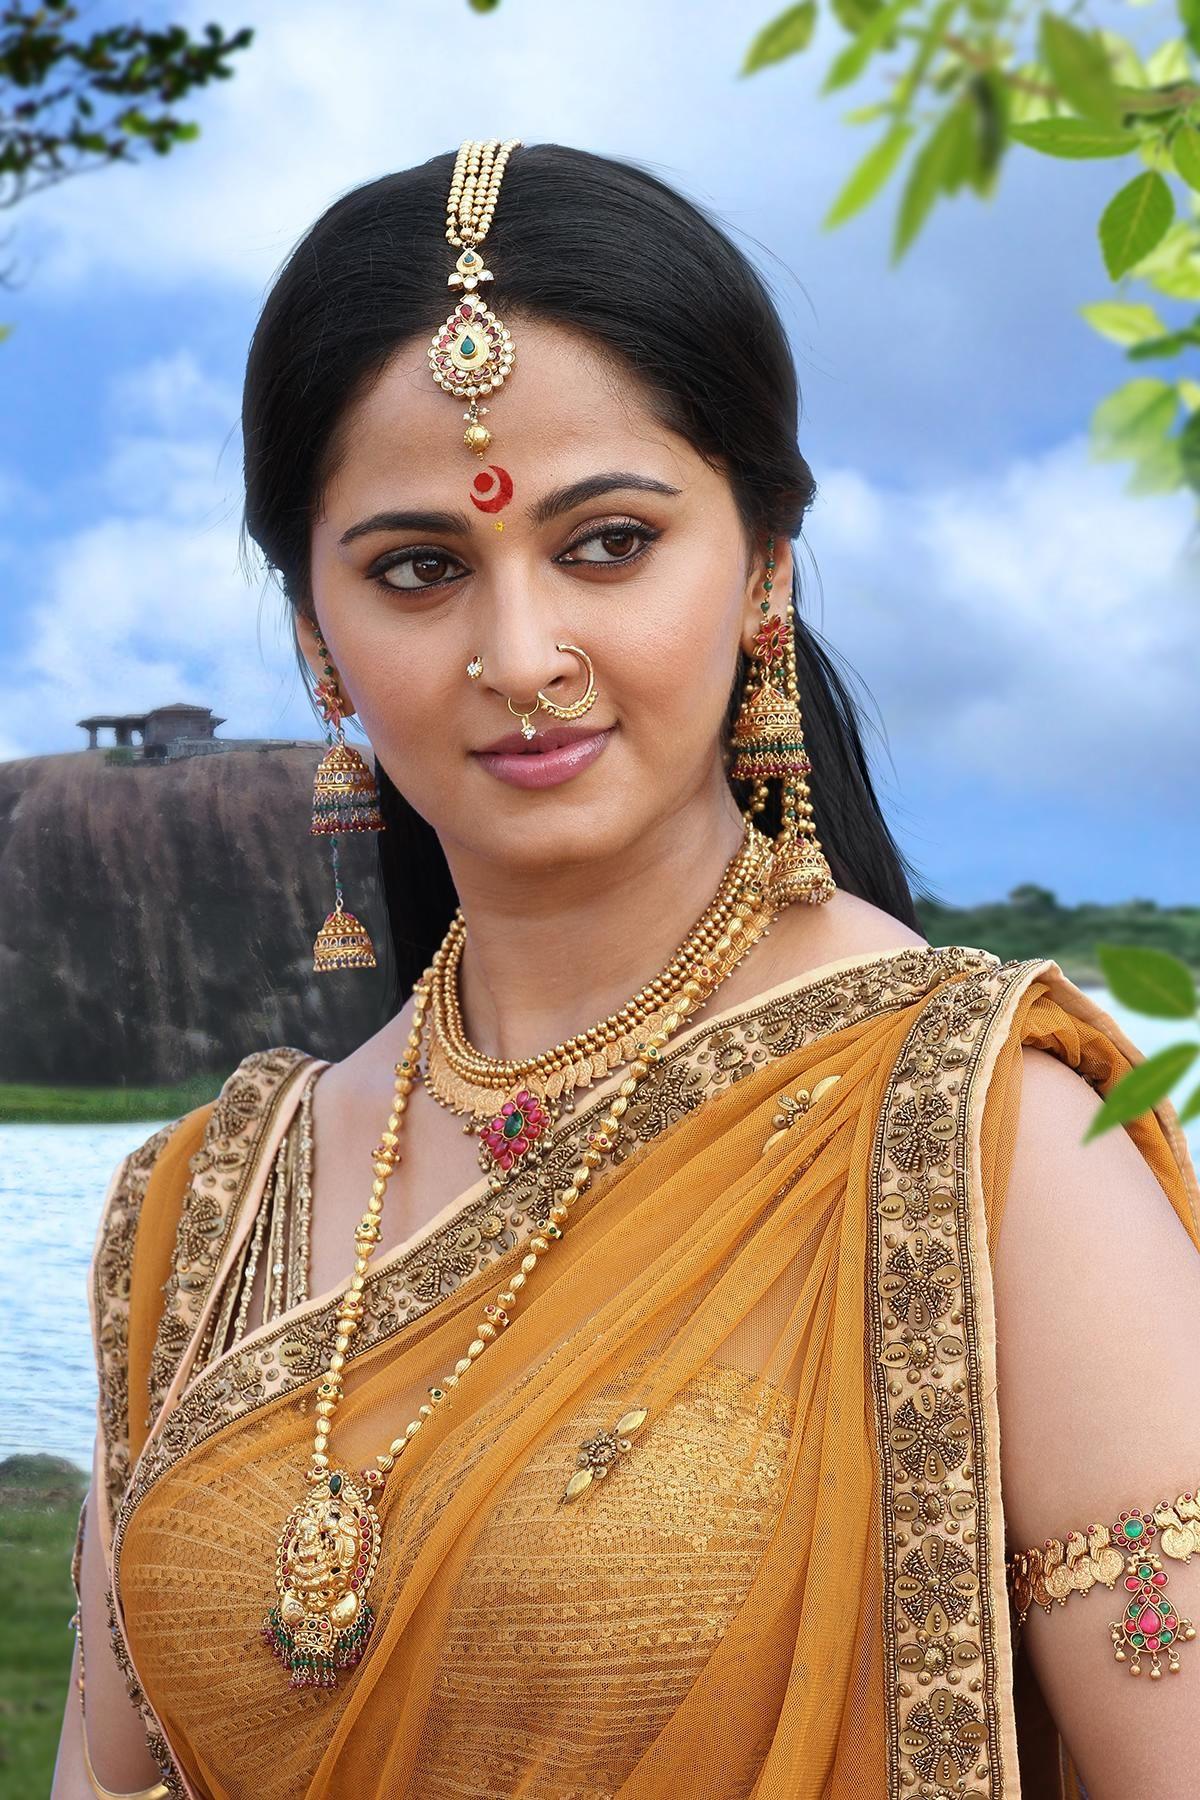 rudhramadevi release date poster